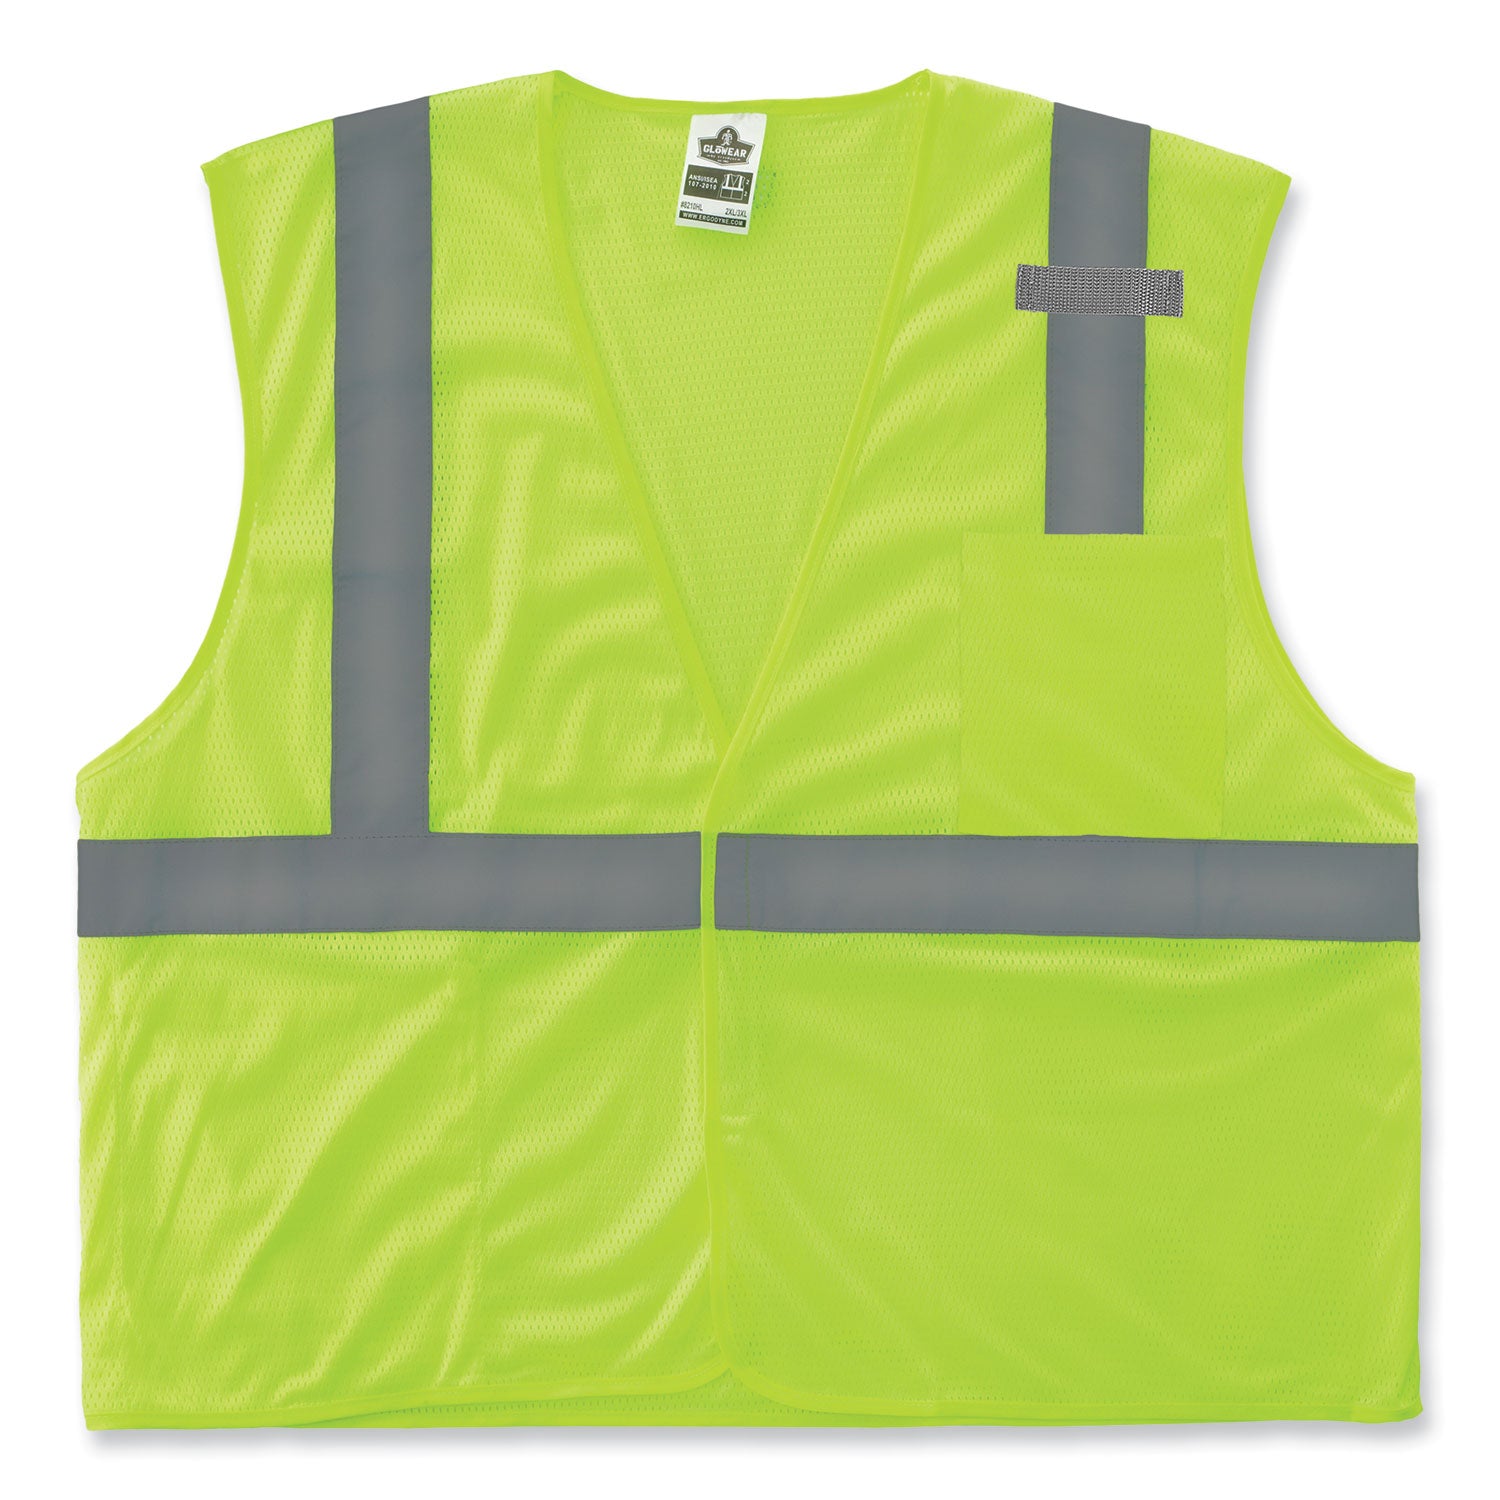 glowear-8210hl-s-single-size-class-2-economy-mesh-vest-polyester-5x-large-lime-ships-in-1-3-business-days_ego24529 - 1